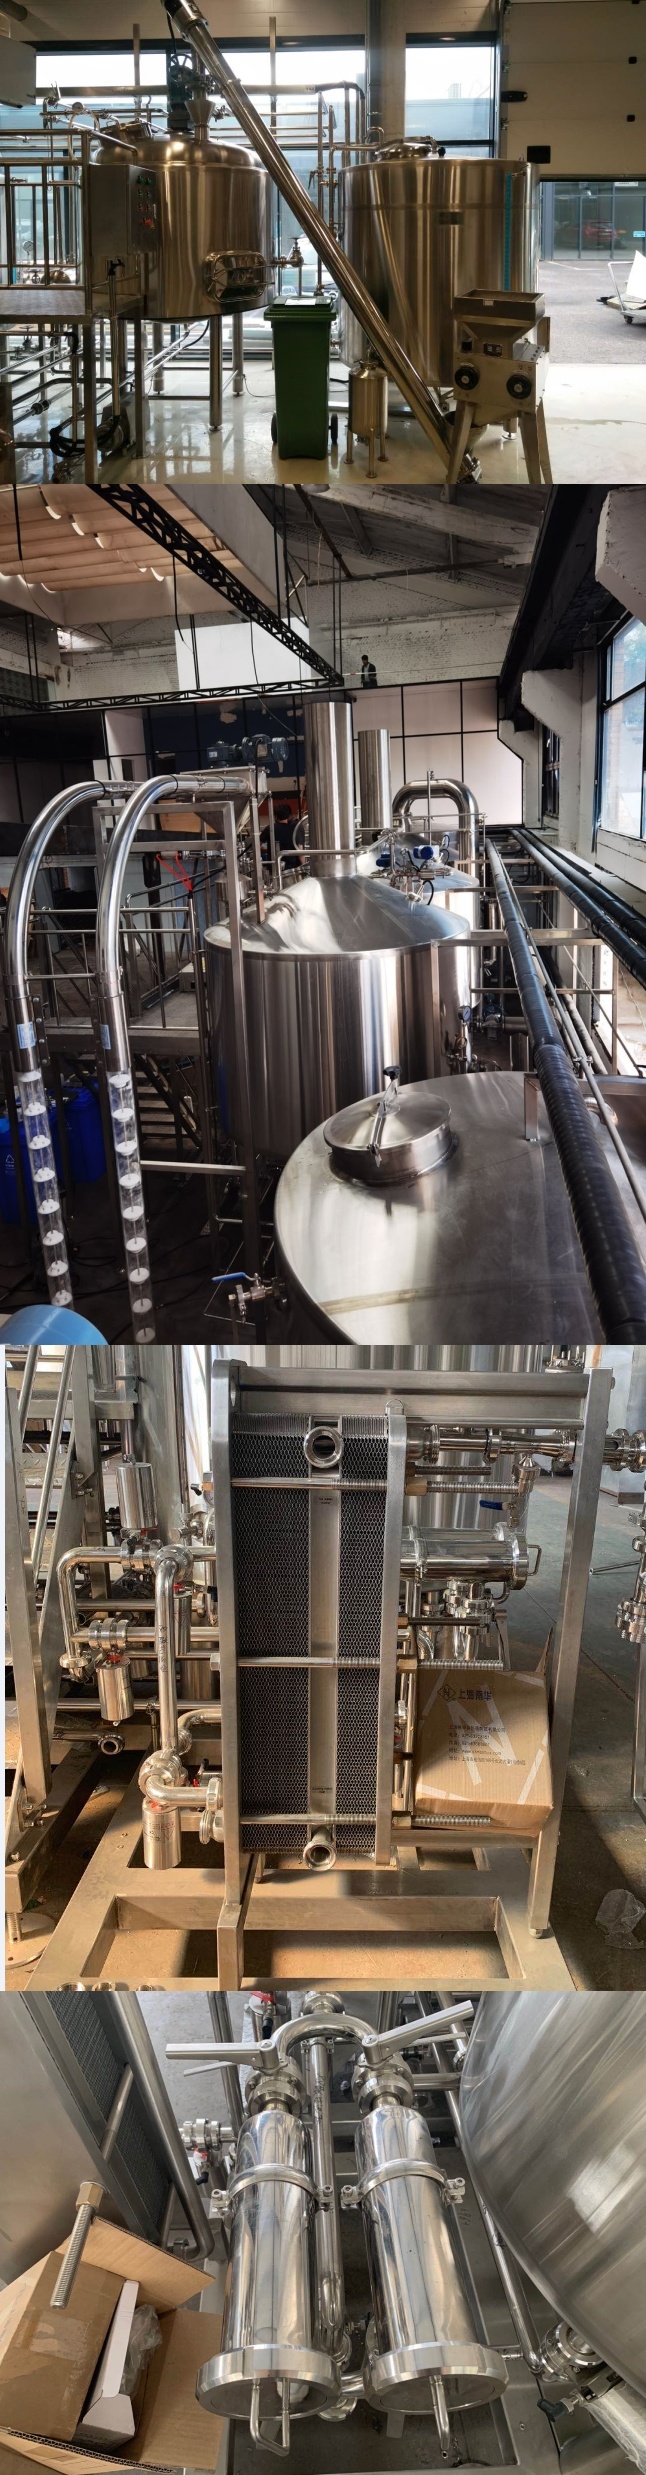 Craft Beer Brewing Equipment 3bbl Commercial Brewhouse Brewery